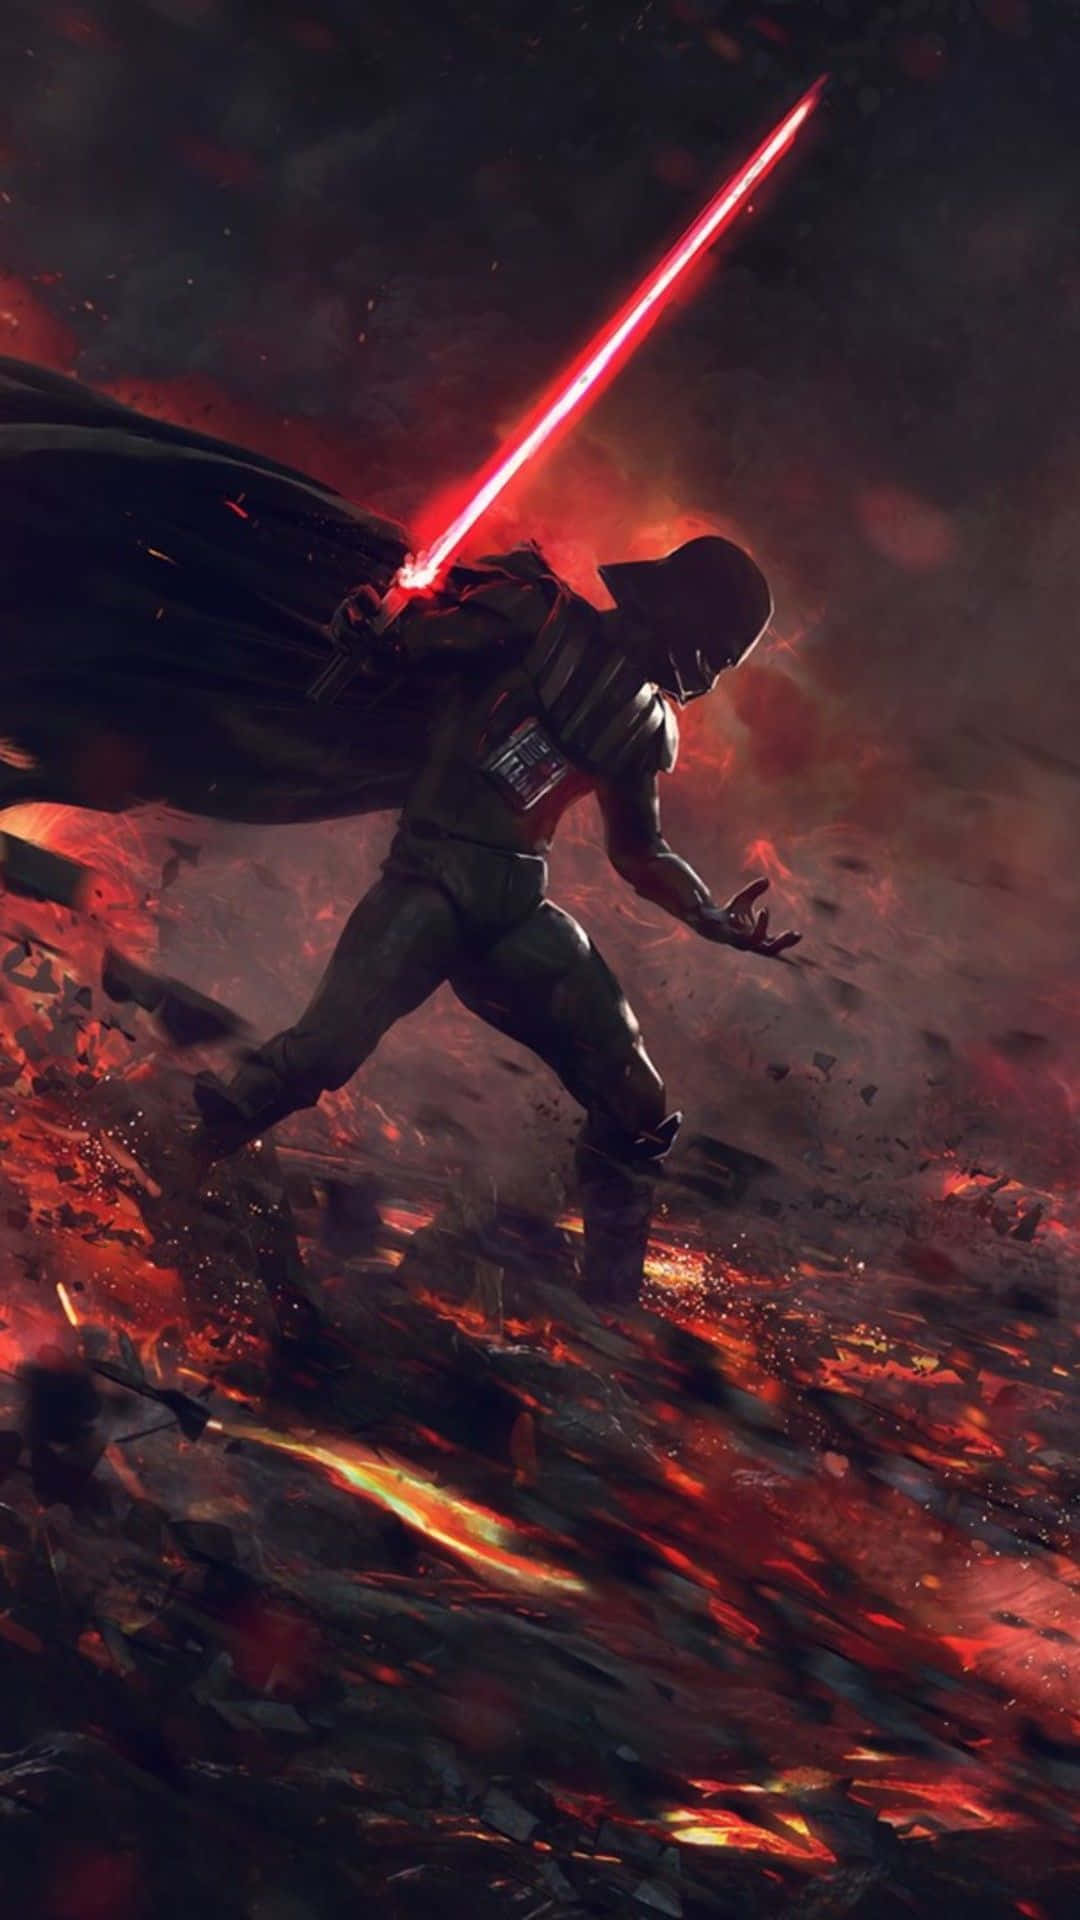 “The Dark Side Has Never Looked So Good” Wallpaper